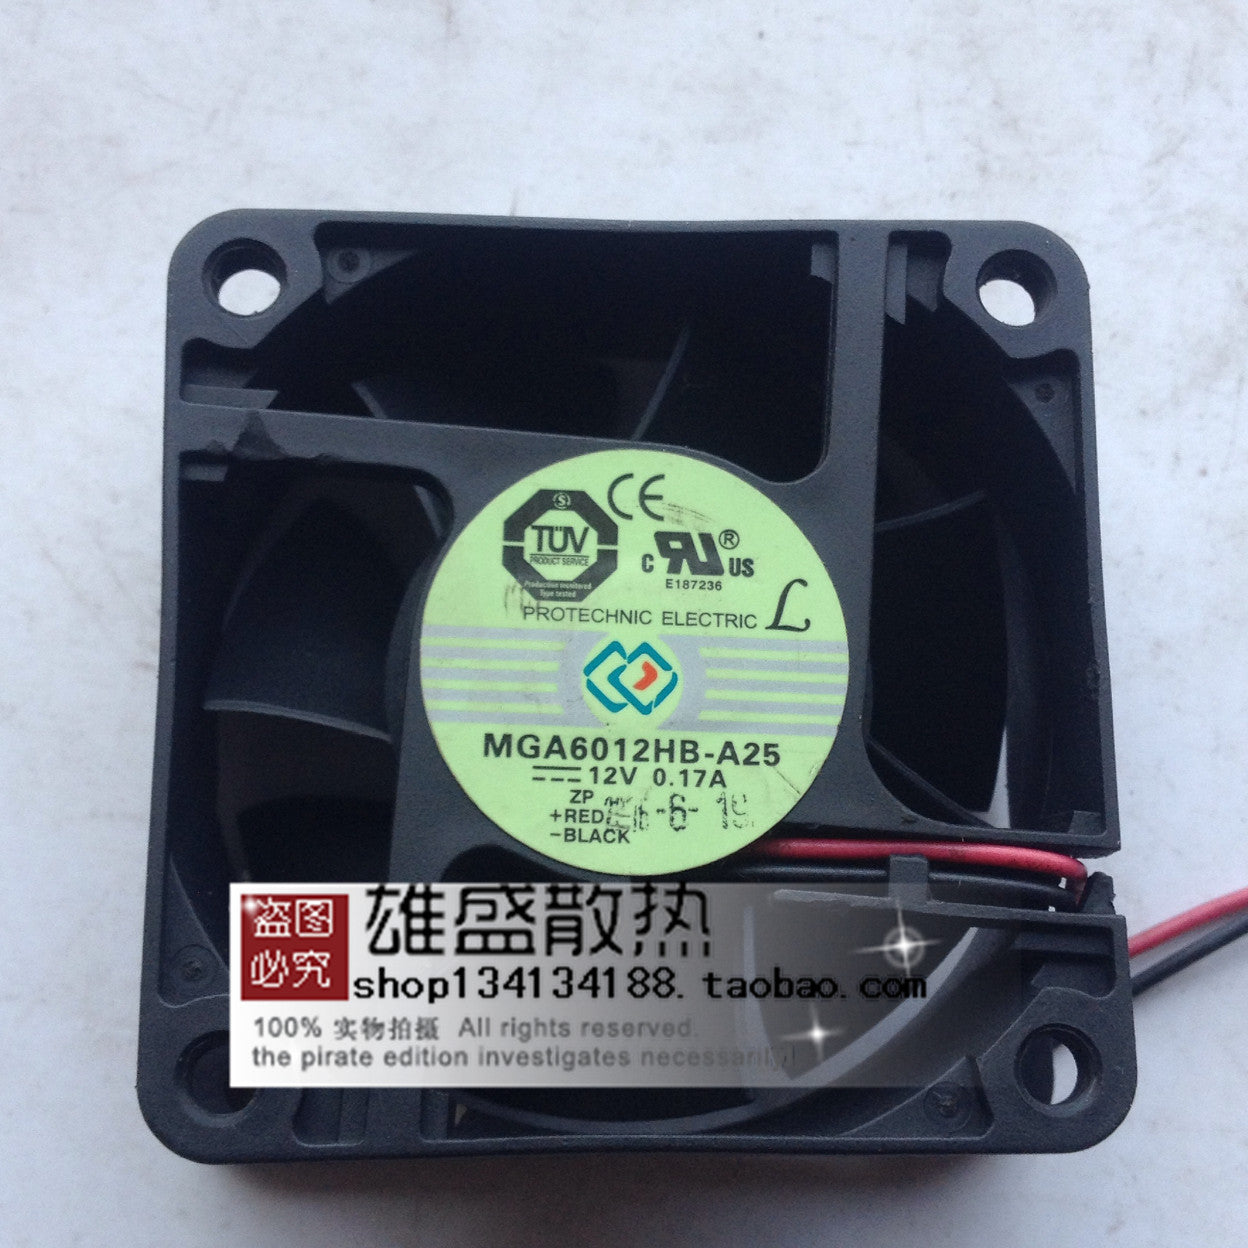 Magic MGA6012Hb-A25 12V 0.17A 6cm 6025 2-Wire Cooling Fan